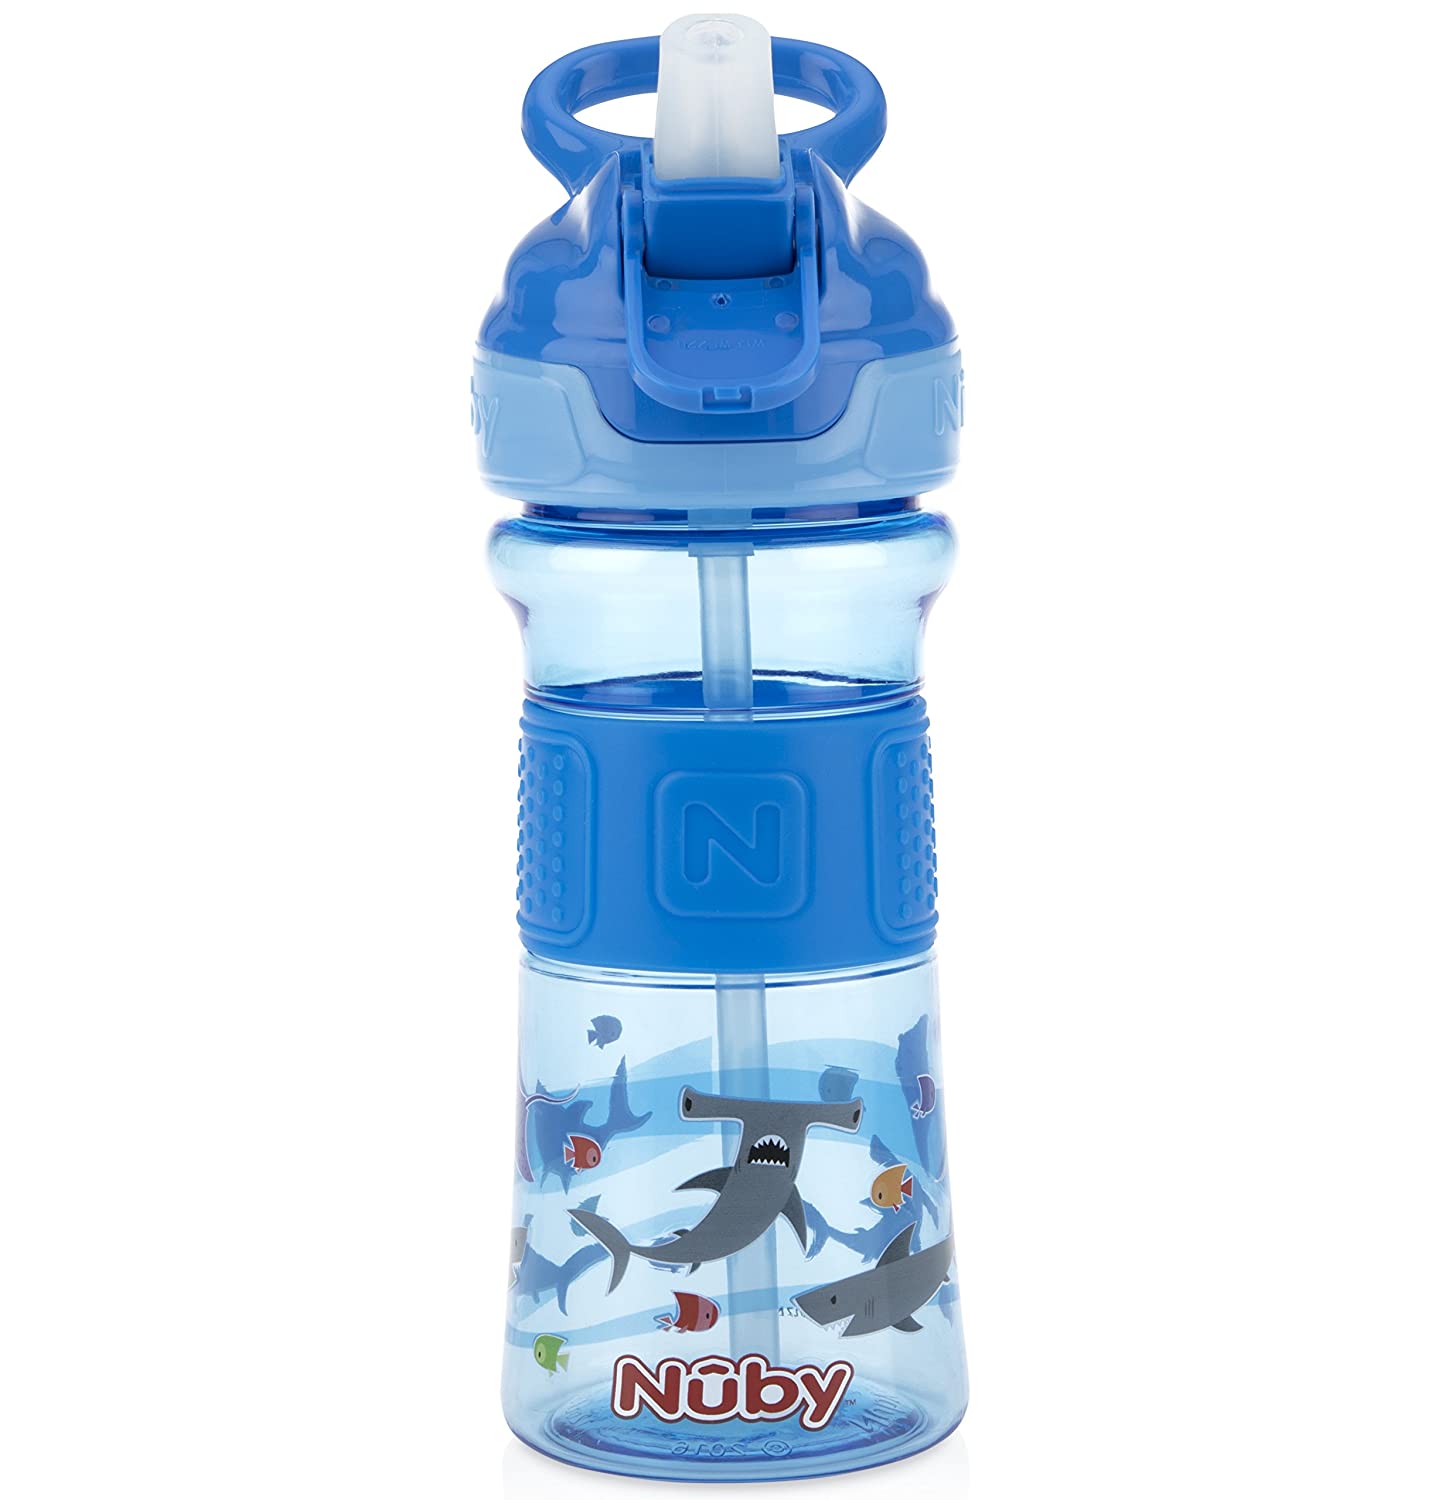 Nuby Thirsty Kids Push Button Flip-it Soft Spout on The Go Water Bottle with Easy Grip Band